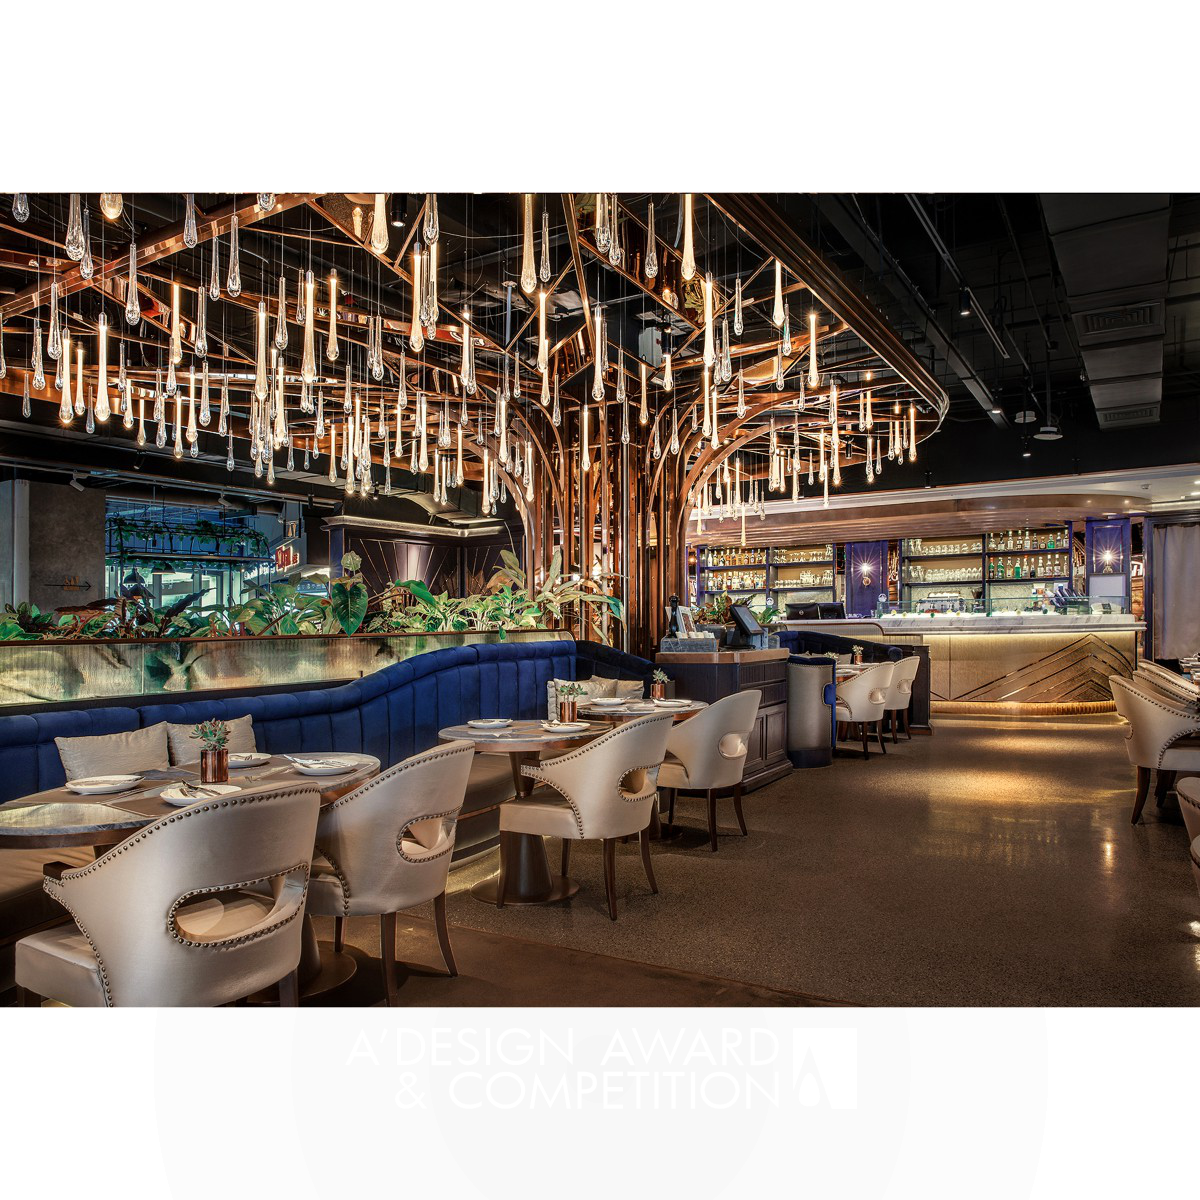 Cafe Flo La Rosee Casual Dining by David Chang Golden Hospitality, Recreation, Travel and Tourism Design Award Winner 2019 